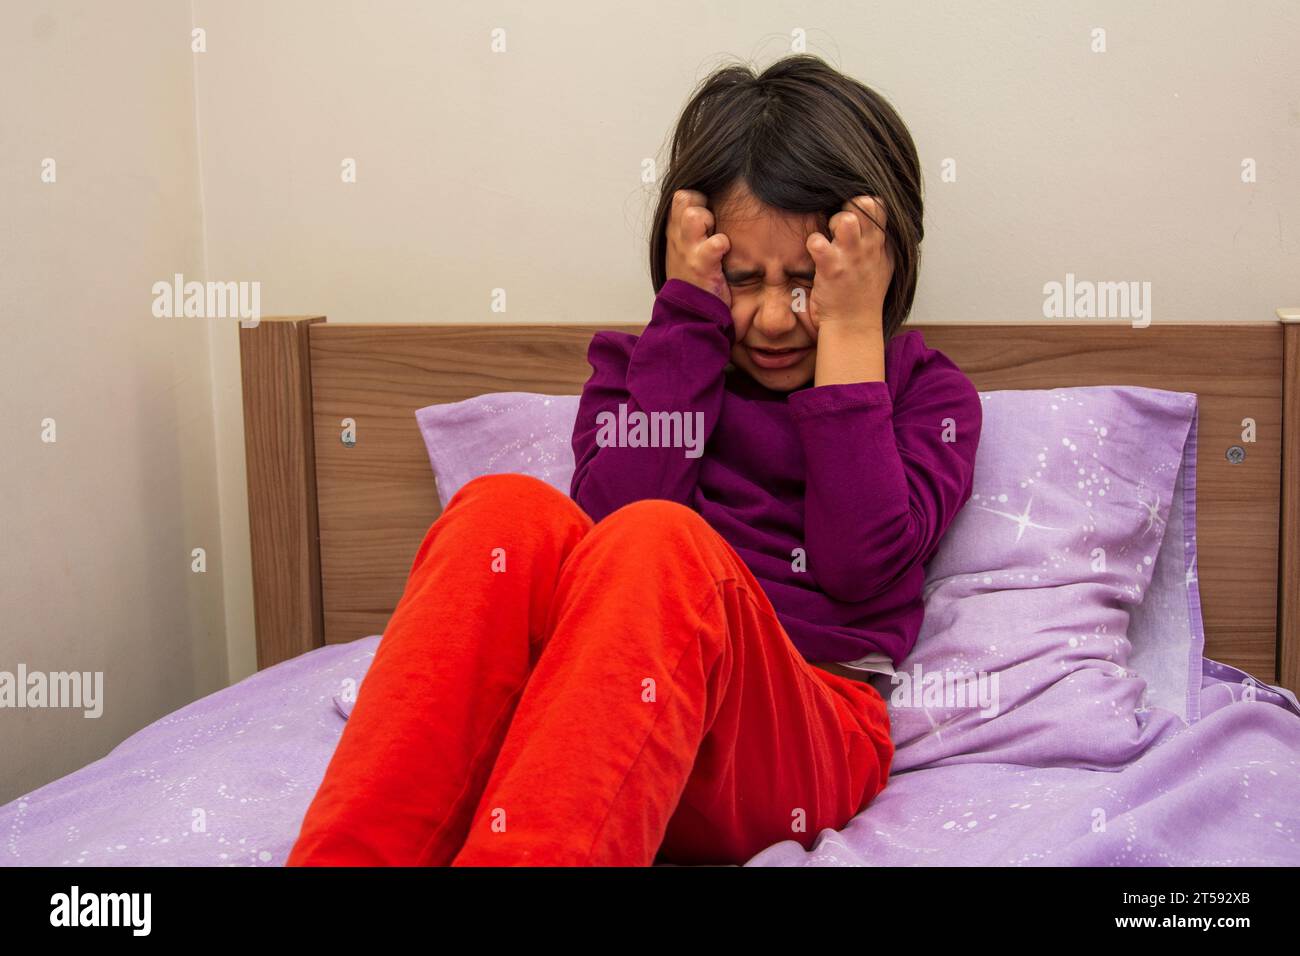 Unable to bear the headache, little girl holds her head with both hands Stock Photo